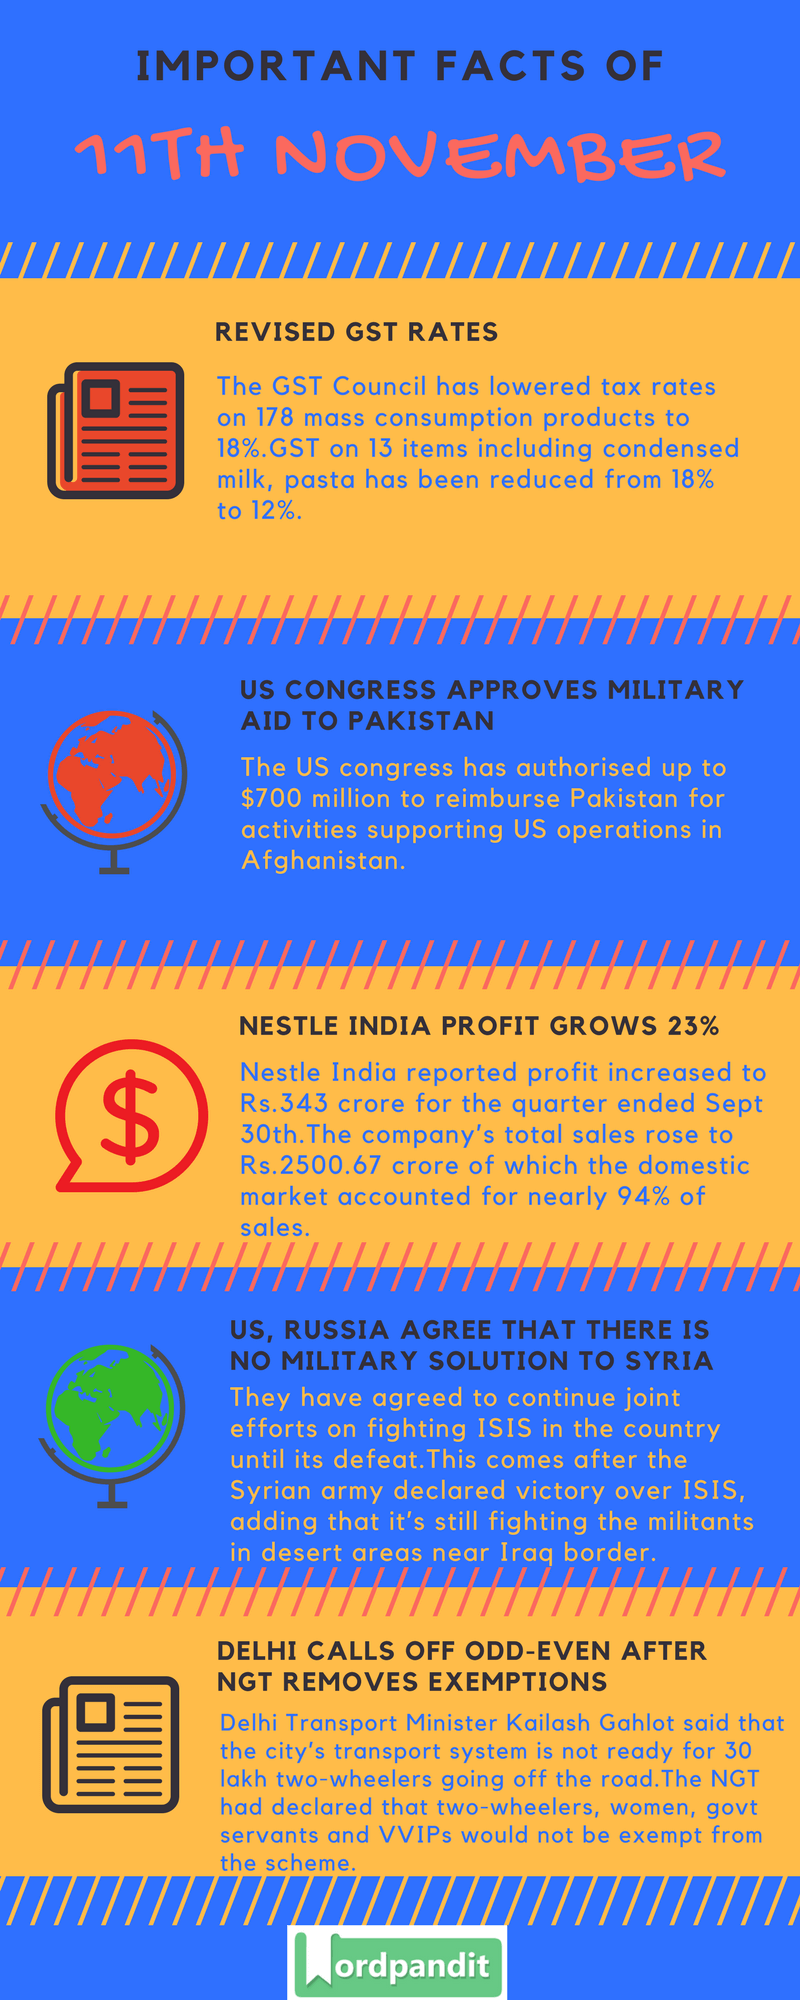 Daily-Current-Affairs-11-november-2017-Current-Affairs-Quiz-november-11-2017-Current-Affairs-Infographic